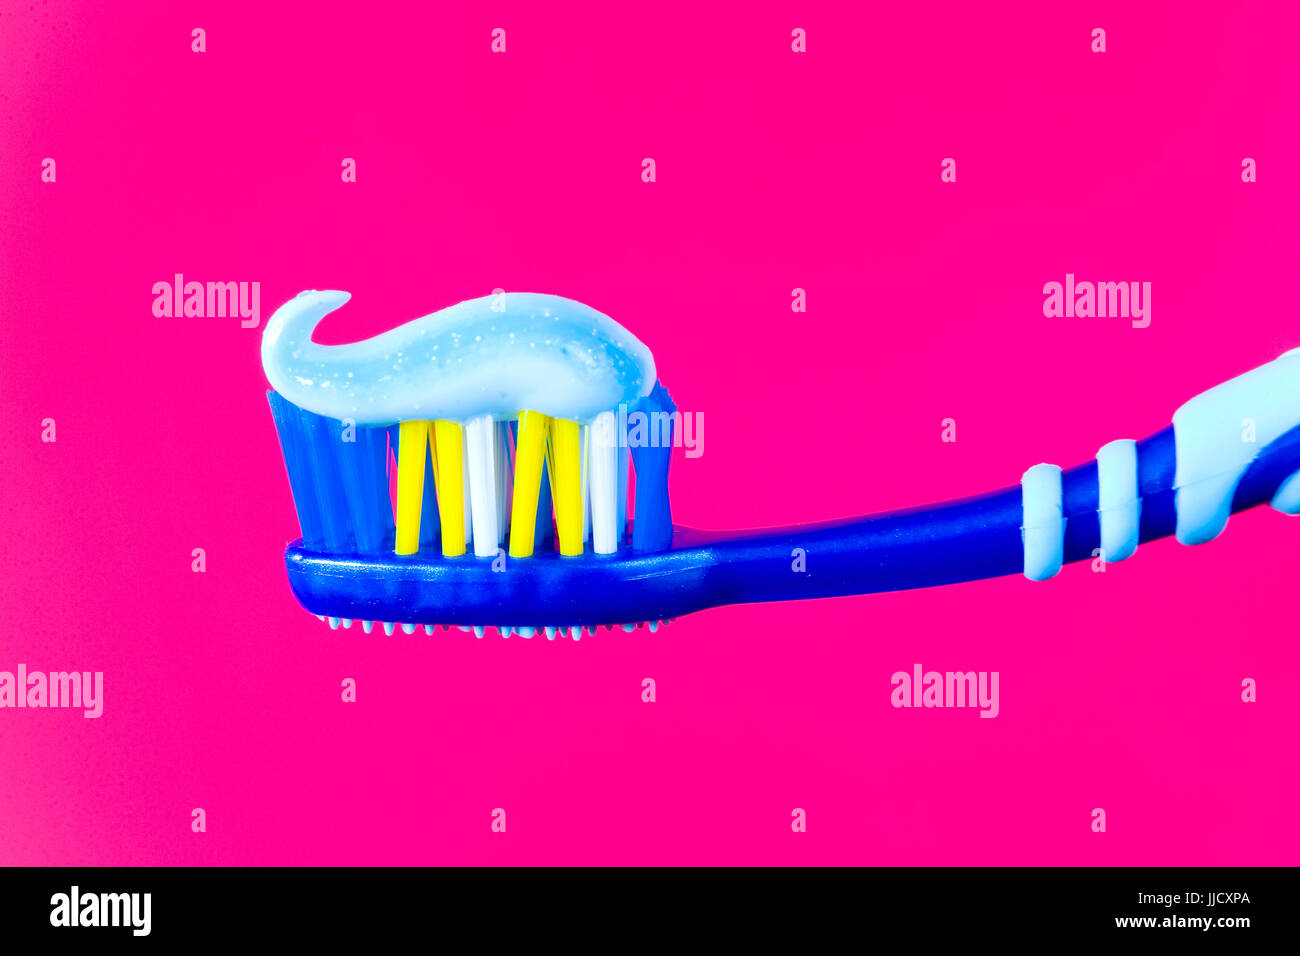 Means of personal hygiene. Blue toothbrush with blue toothpaste on a crimson background. Stock Photo